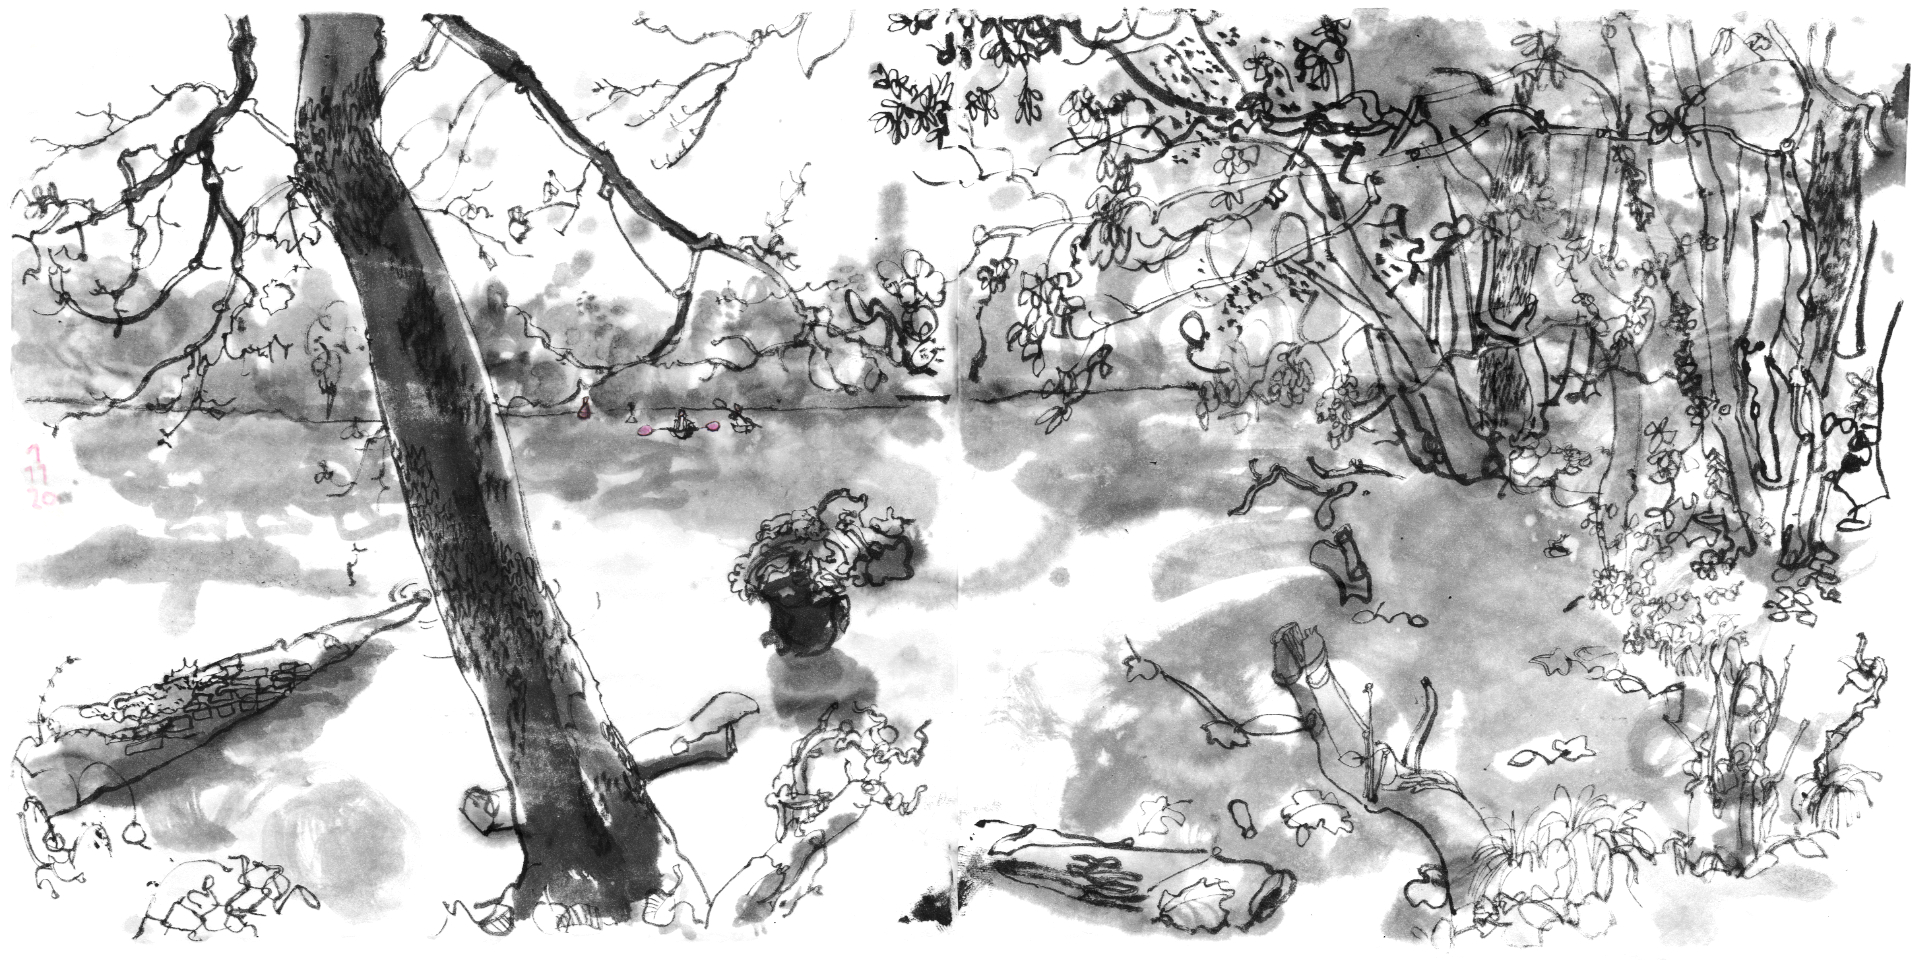 Ink drawing from the side of a lake, trees, one in front, more on the bank at the right and on the opposite bank, logs in the water. Two paddlers in kayaks approaching, still far and small.